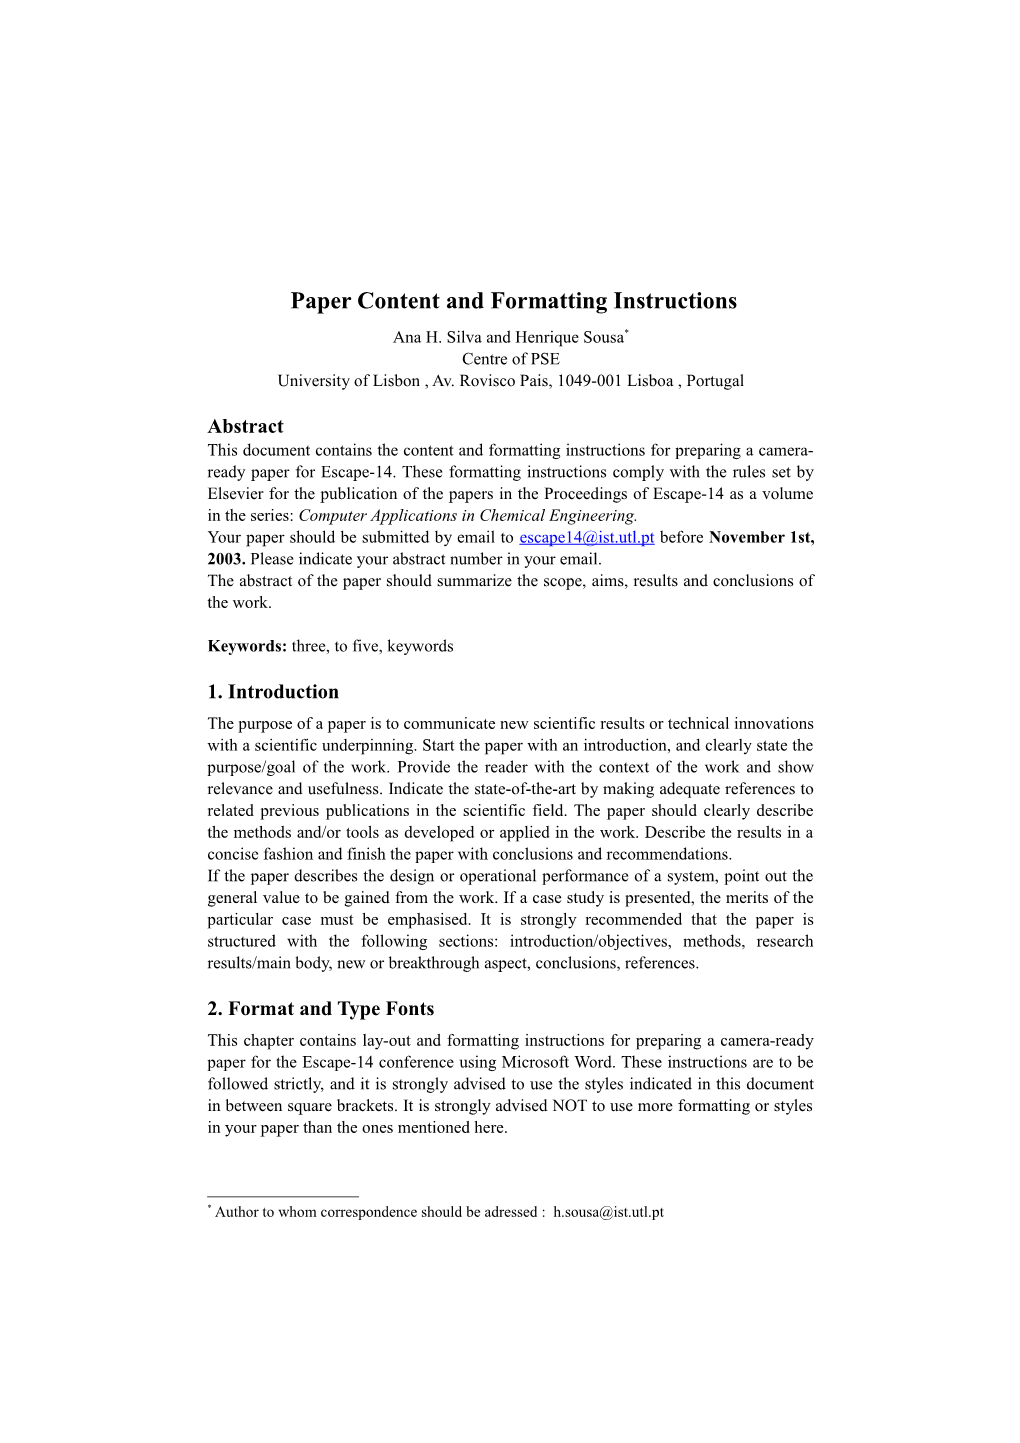 Content and Formatting Instructions